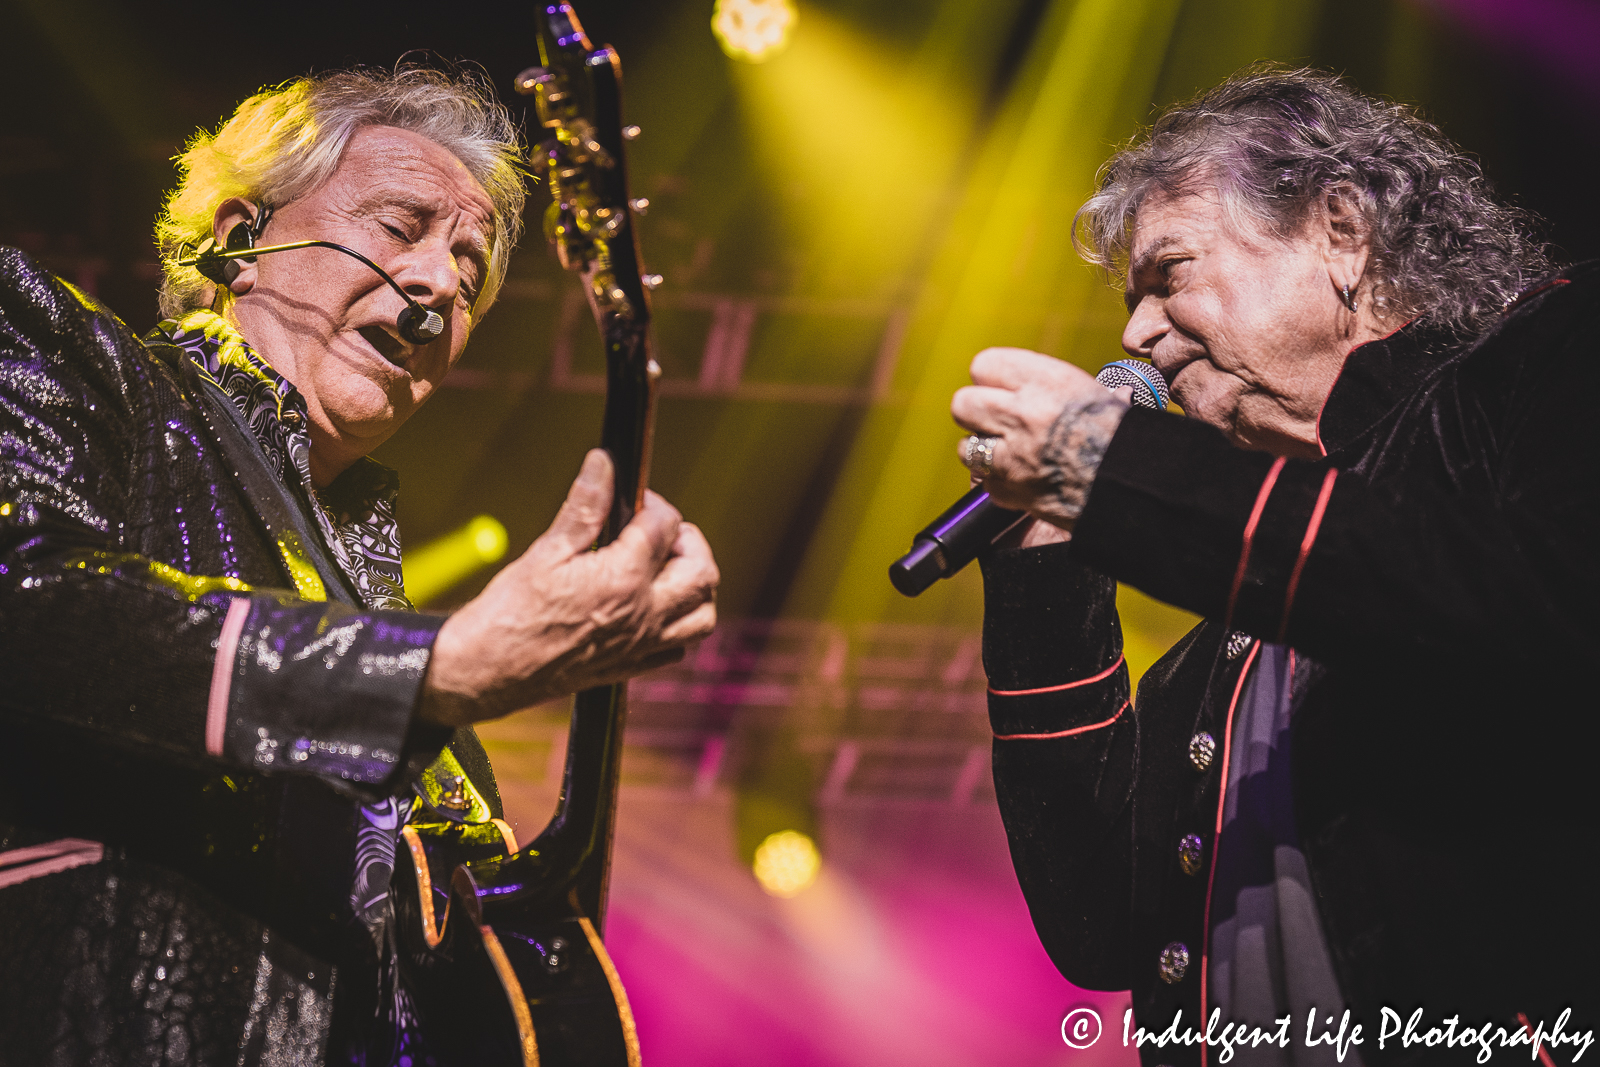 Soft rock duo Air Supply performing "Even the Nights Are Better" live in concert at Ameristar Casino's Star Pavilion in Kansas City, MO on May 5, 2023.